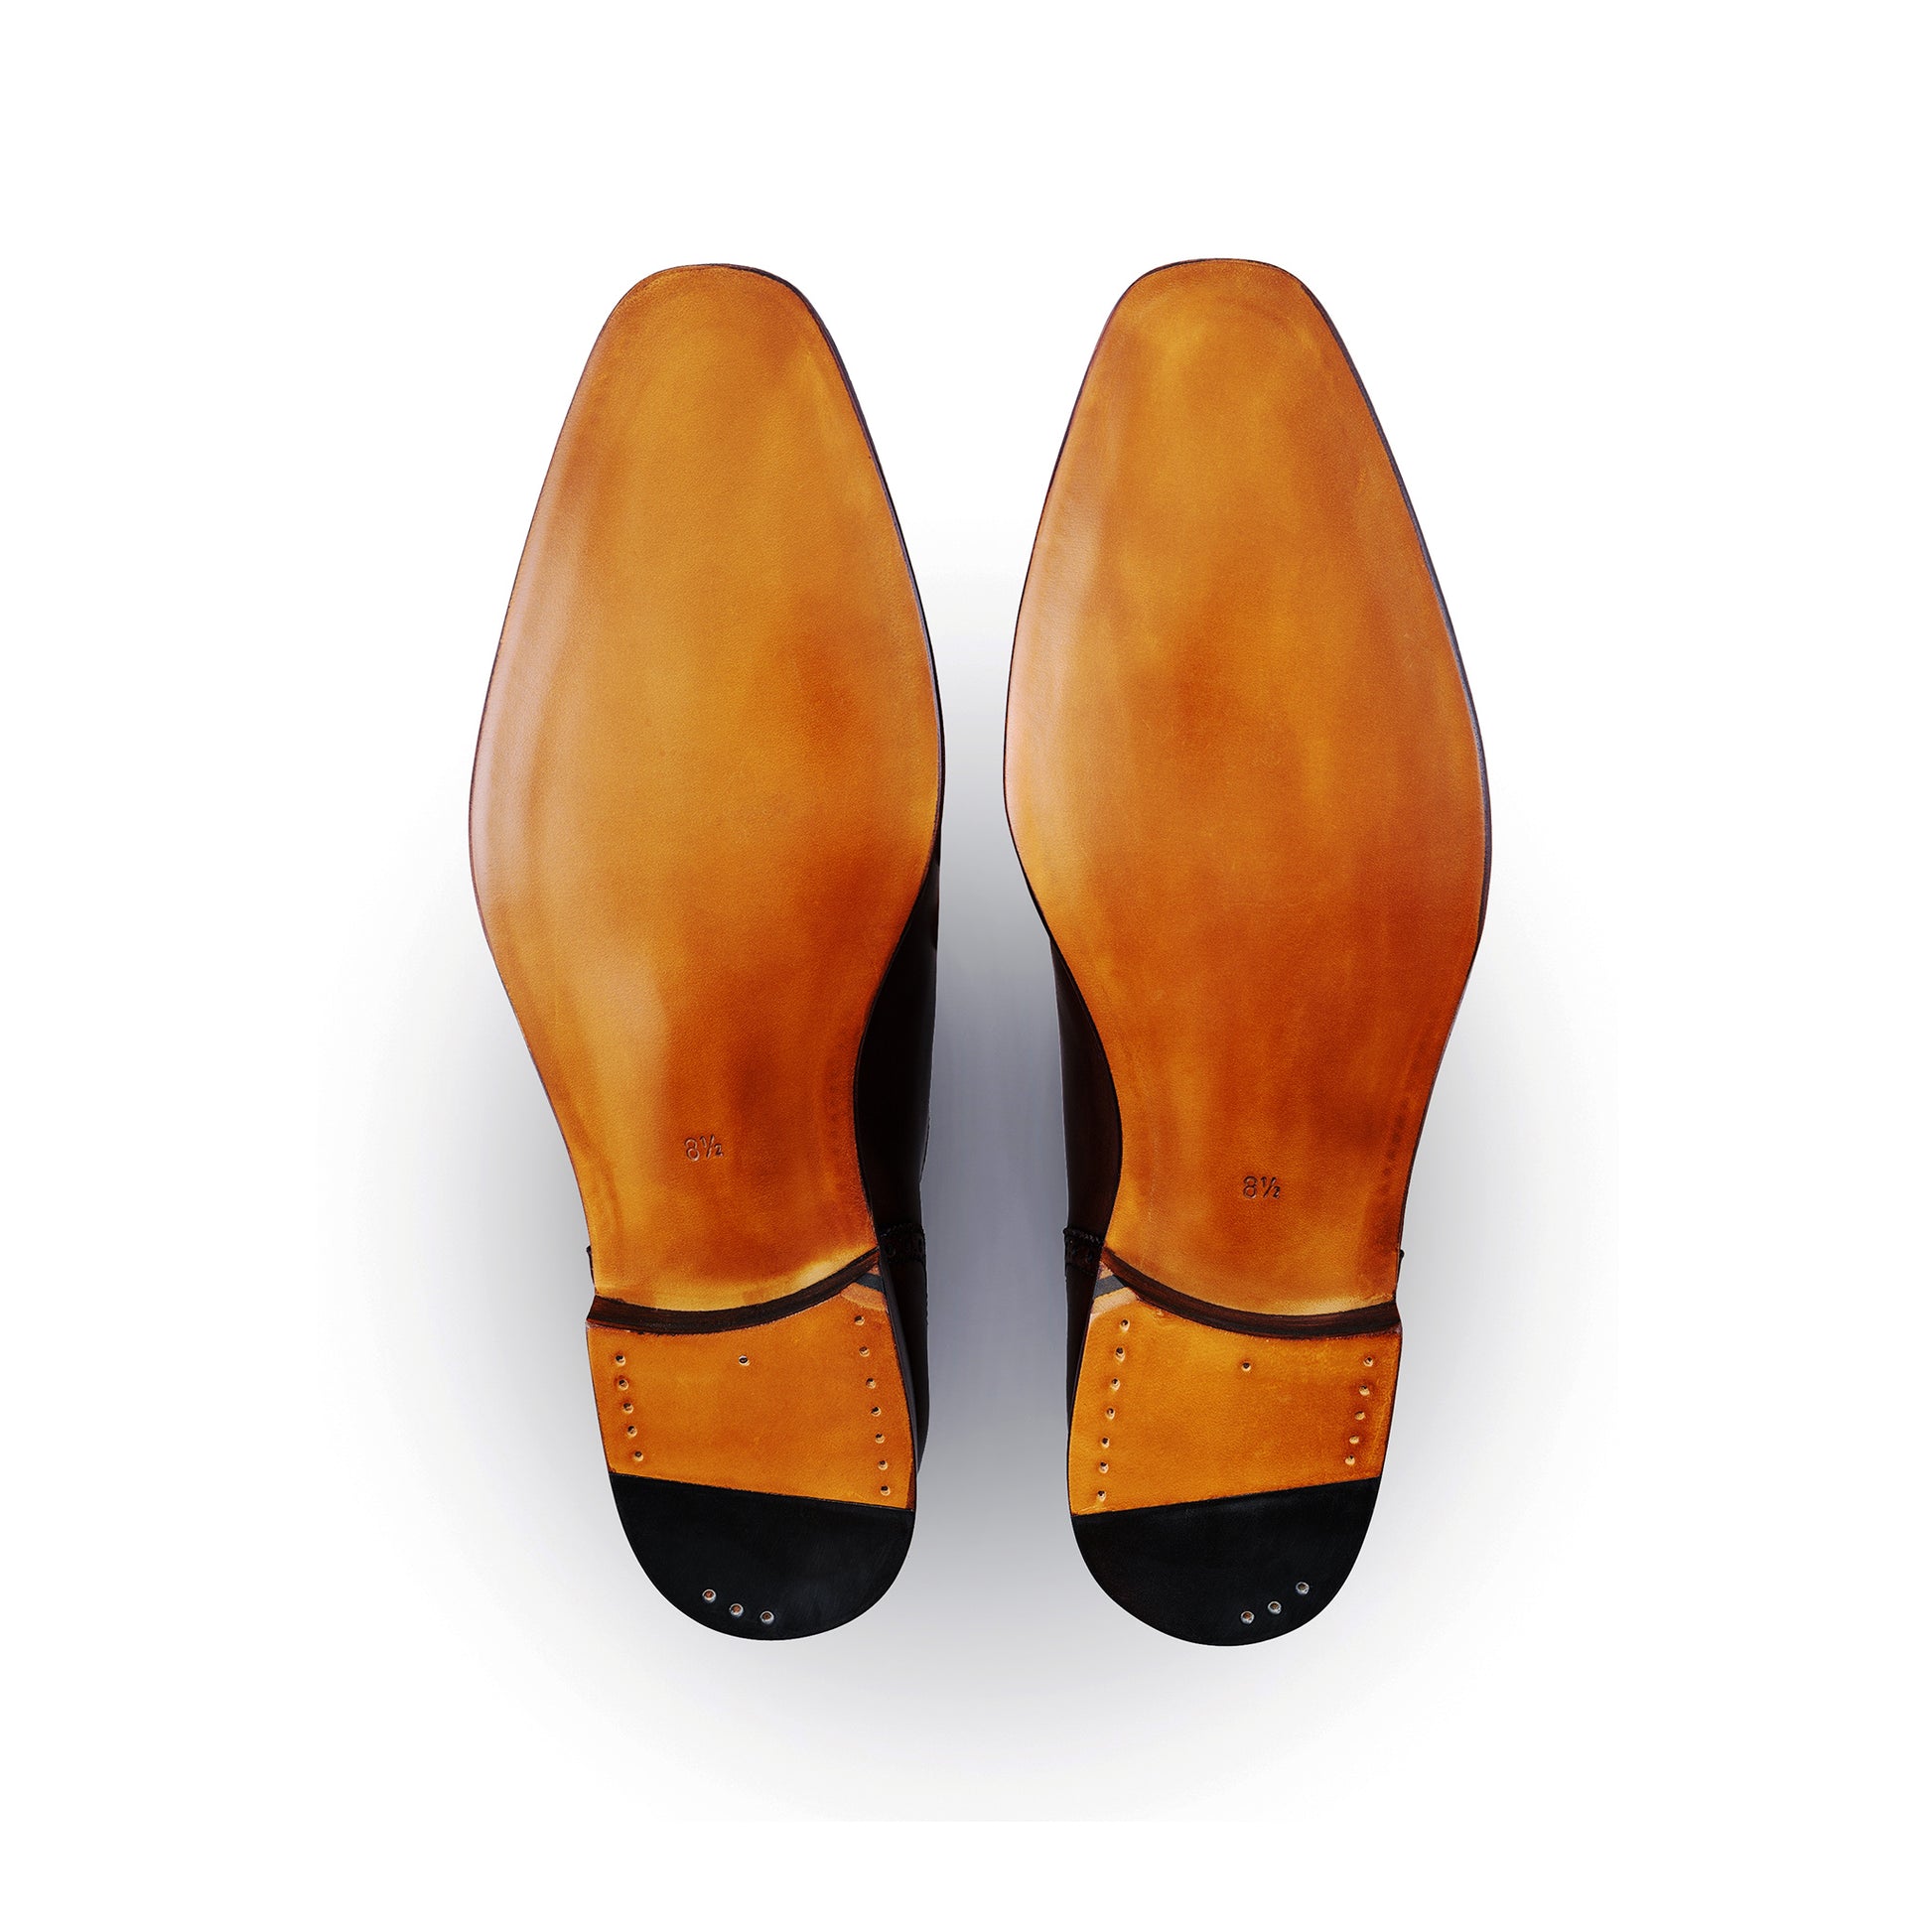 TLB Mallorca leather shoes 517 / OLIVER / BOXCALF BROWN